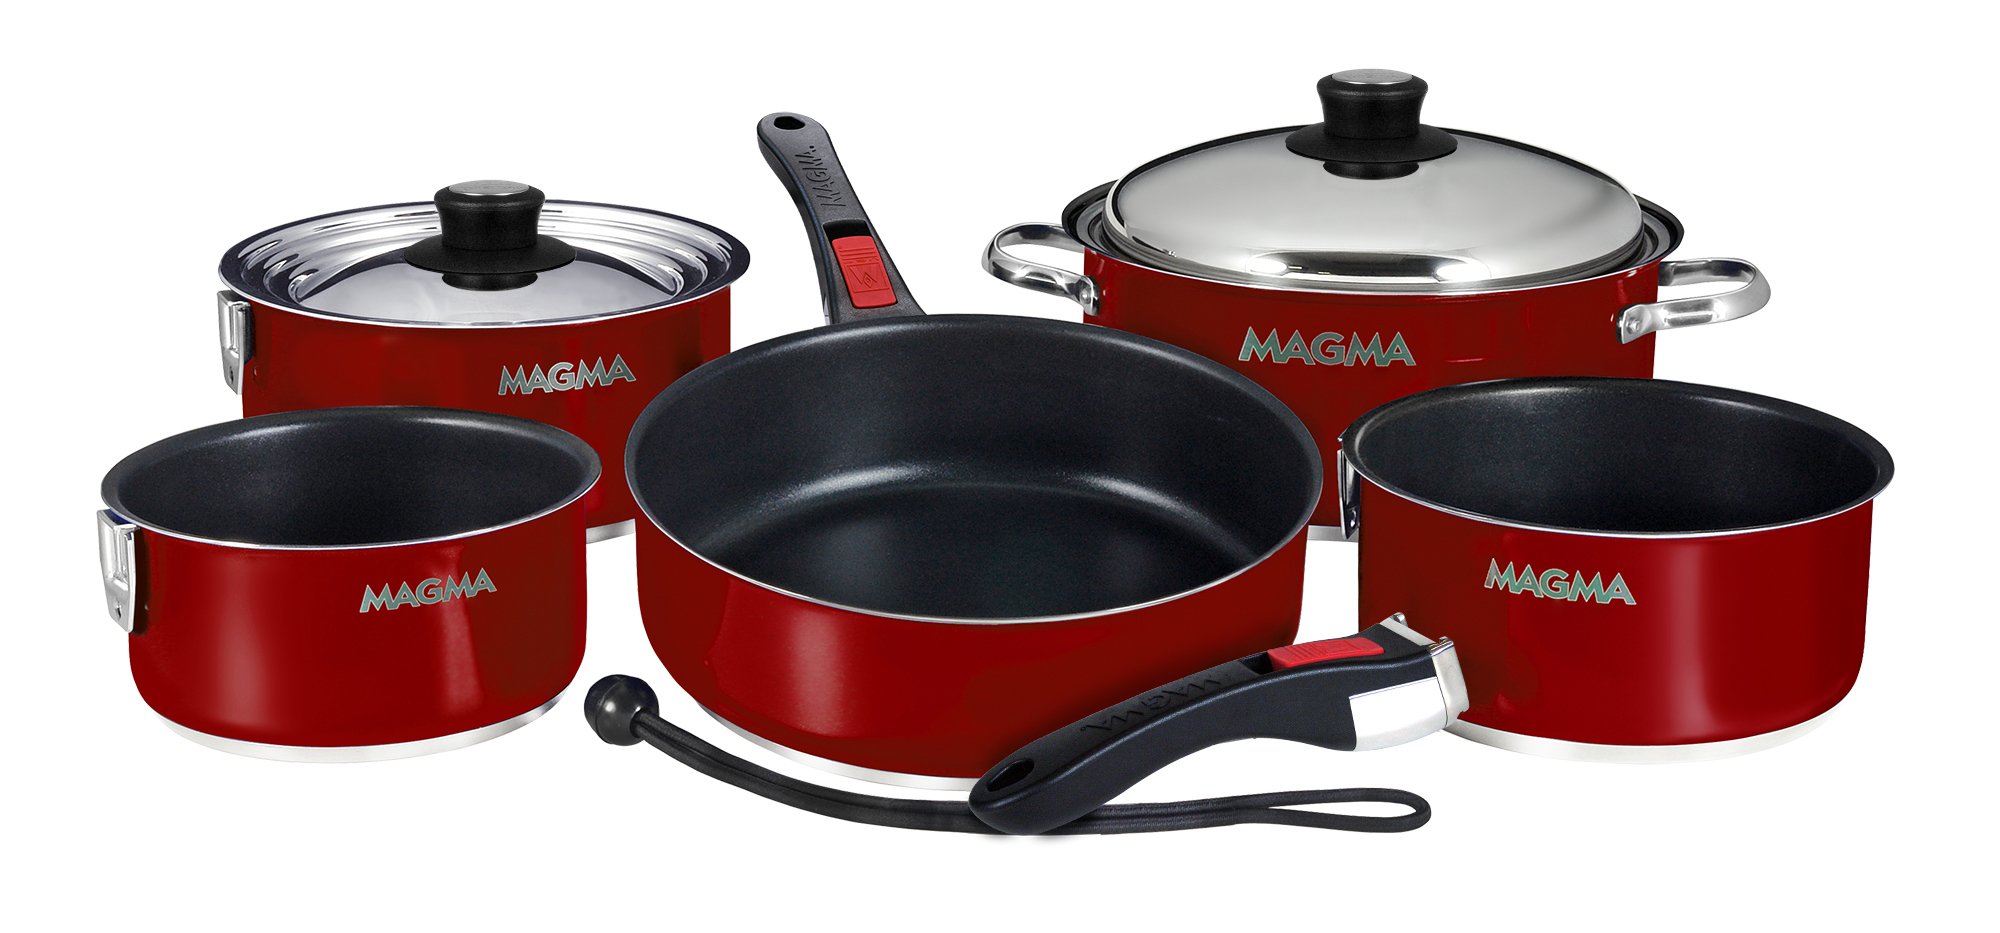 Magma Ceramica 10 Piece Cookware Set - Boundless Outfitters